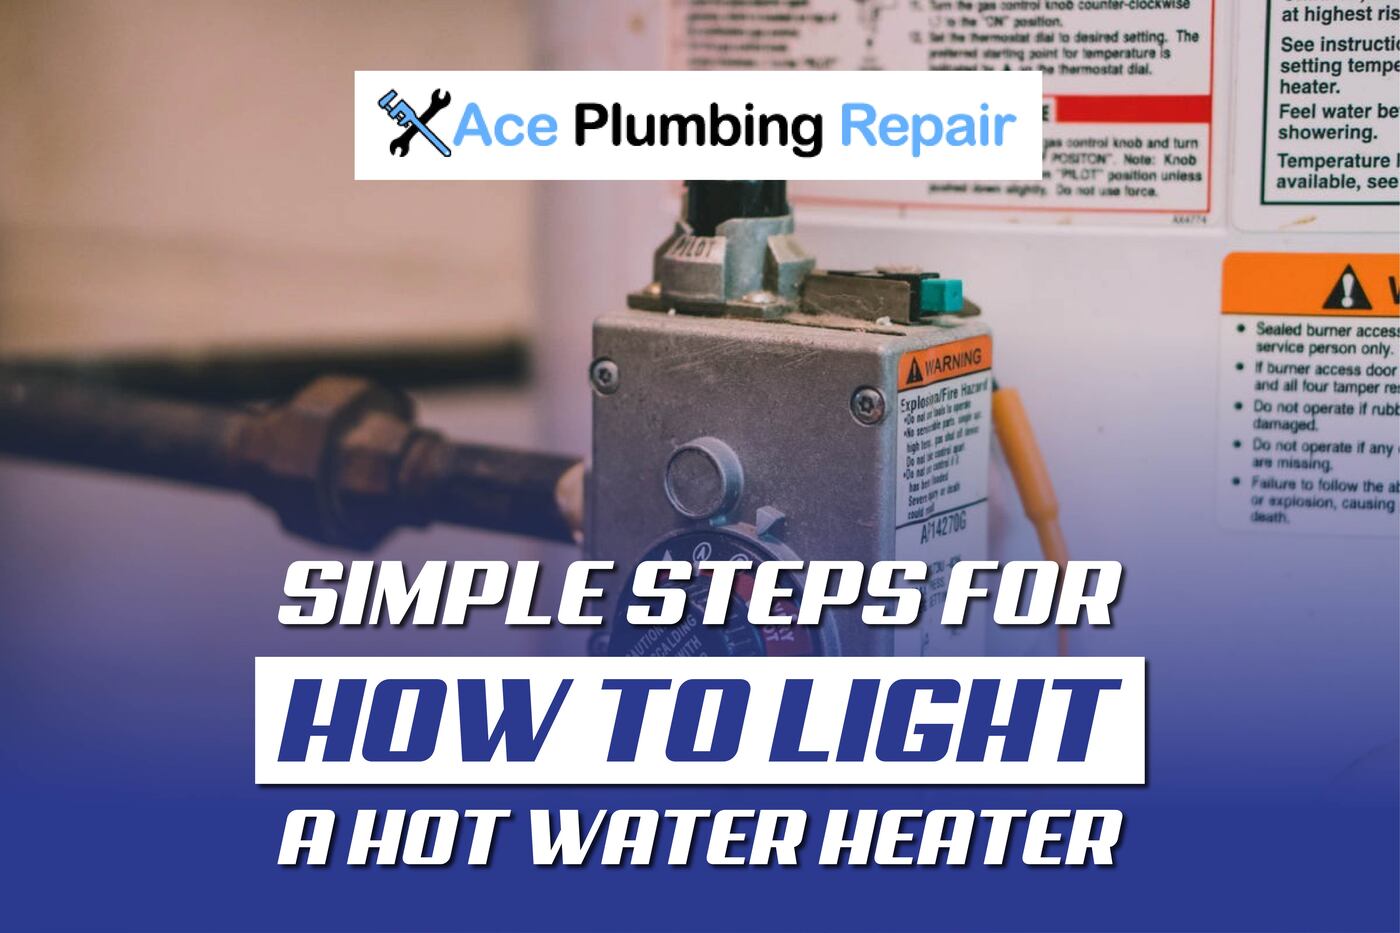 How to light a hot water heater